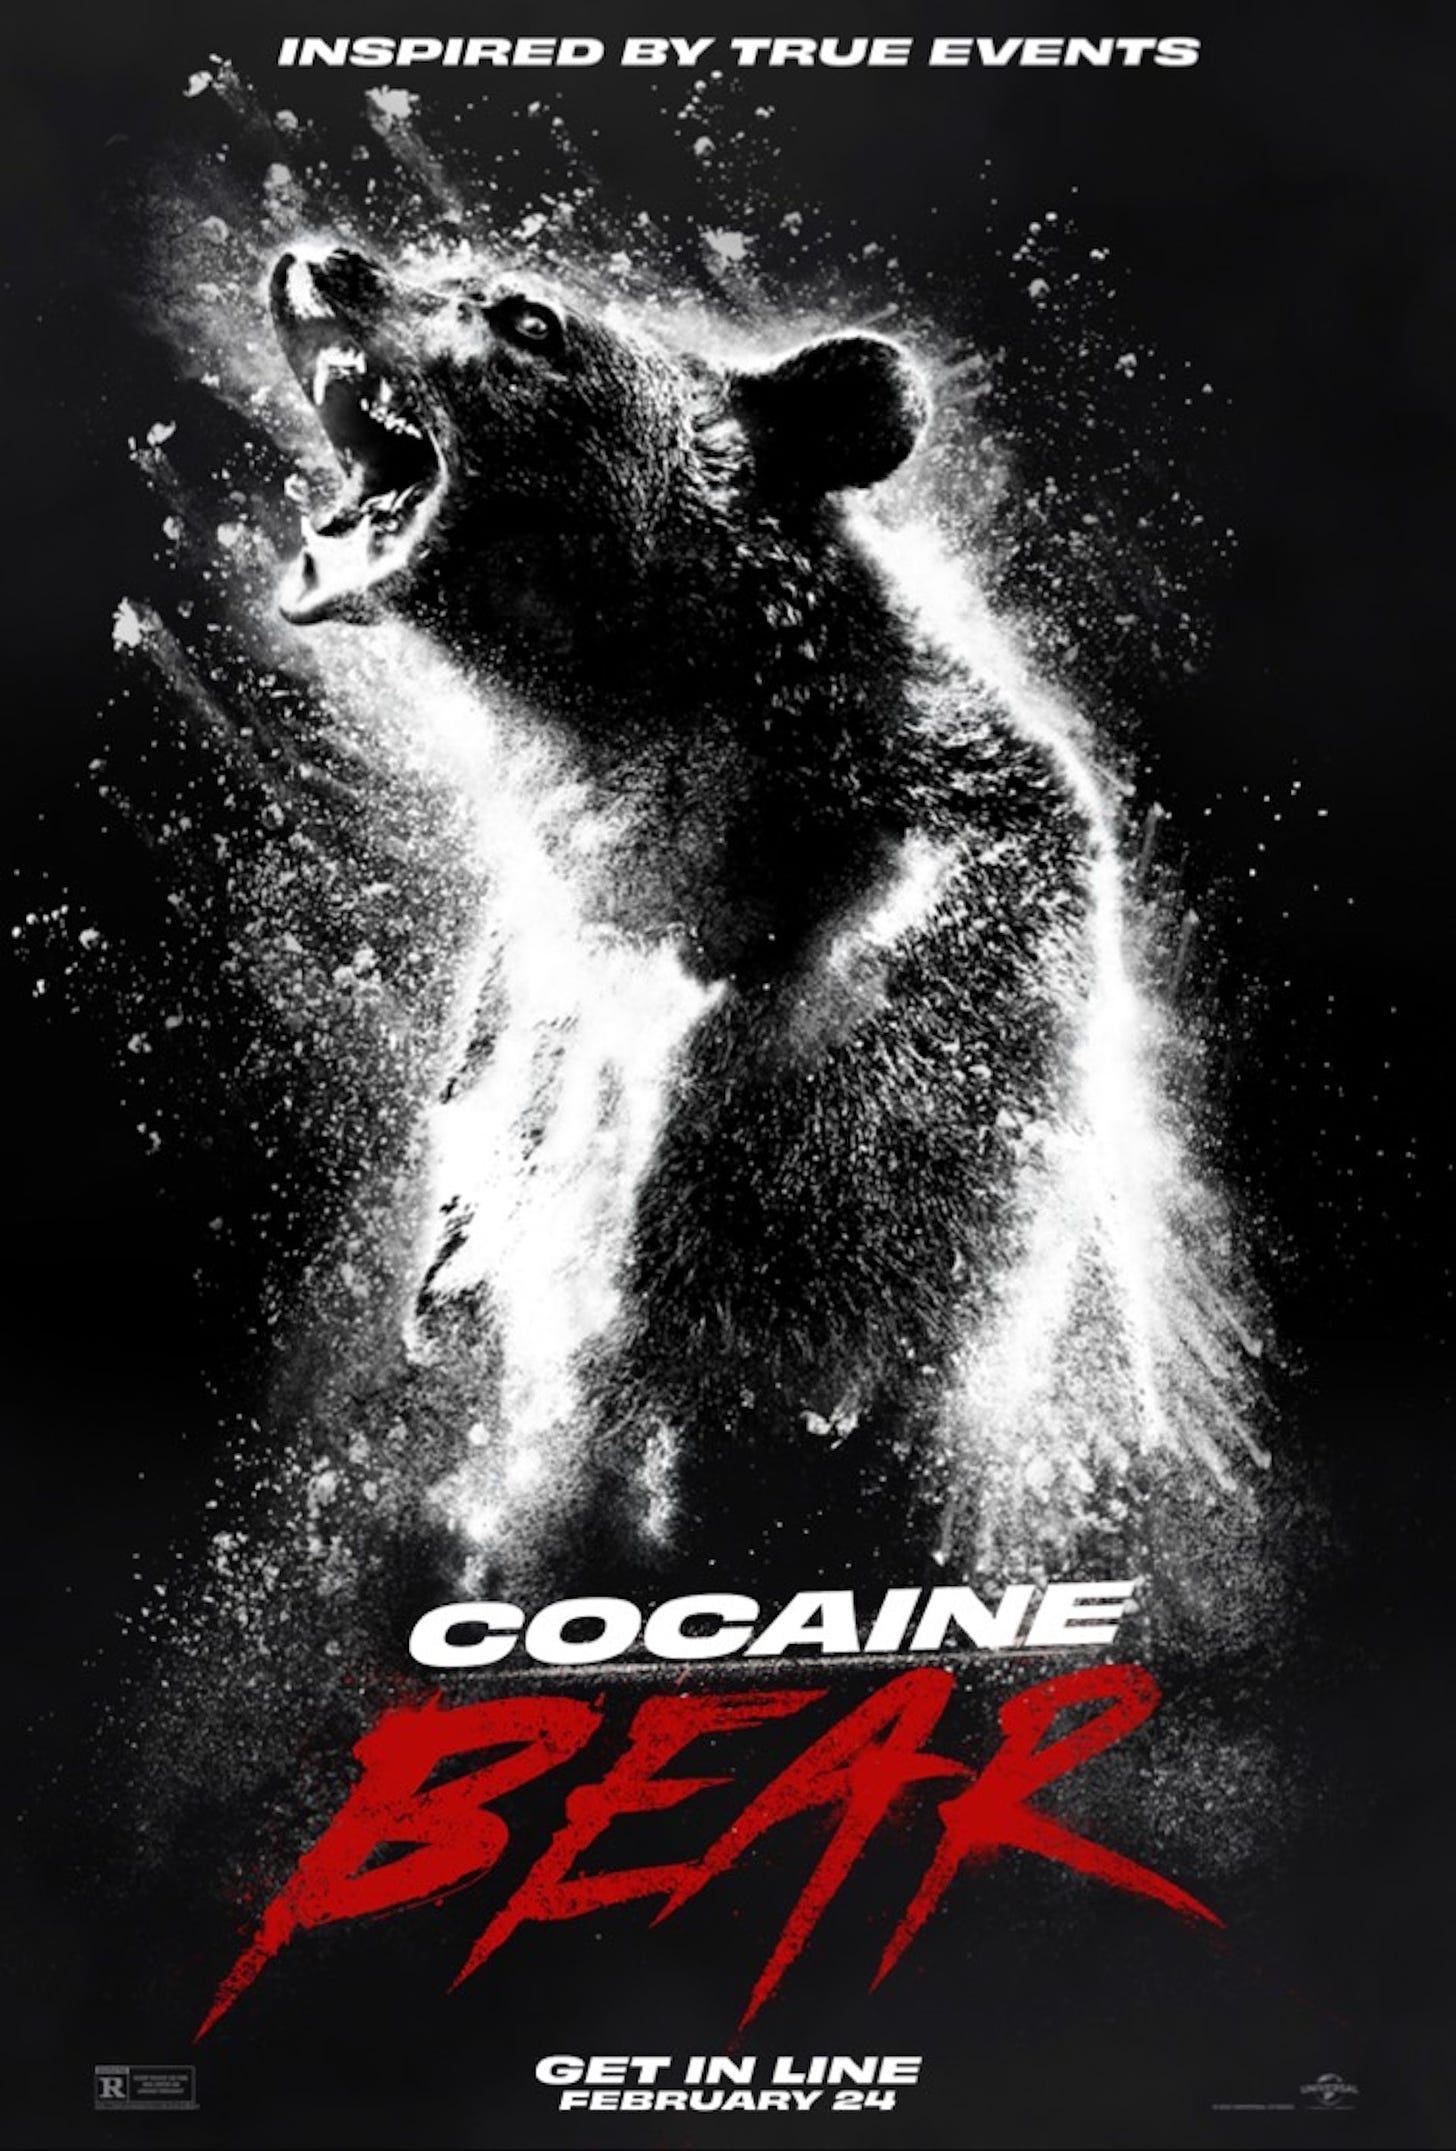 Movie poster for "Cocaine Bear."